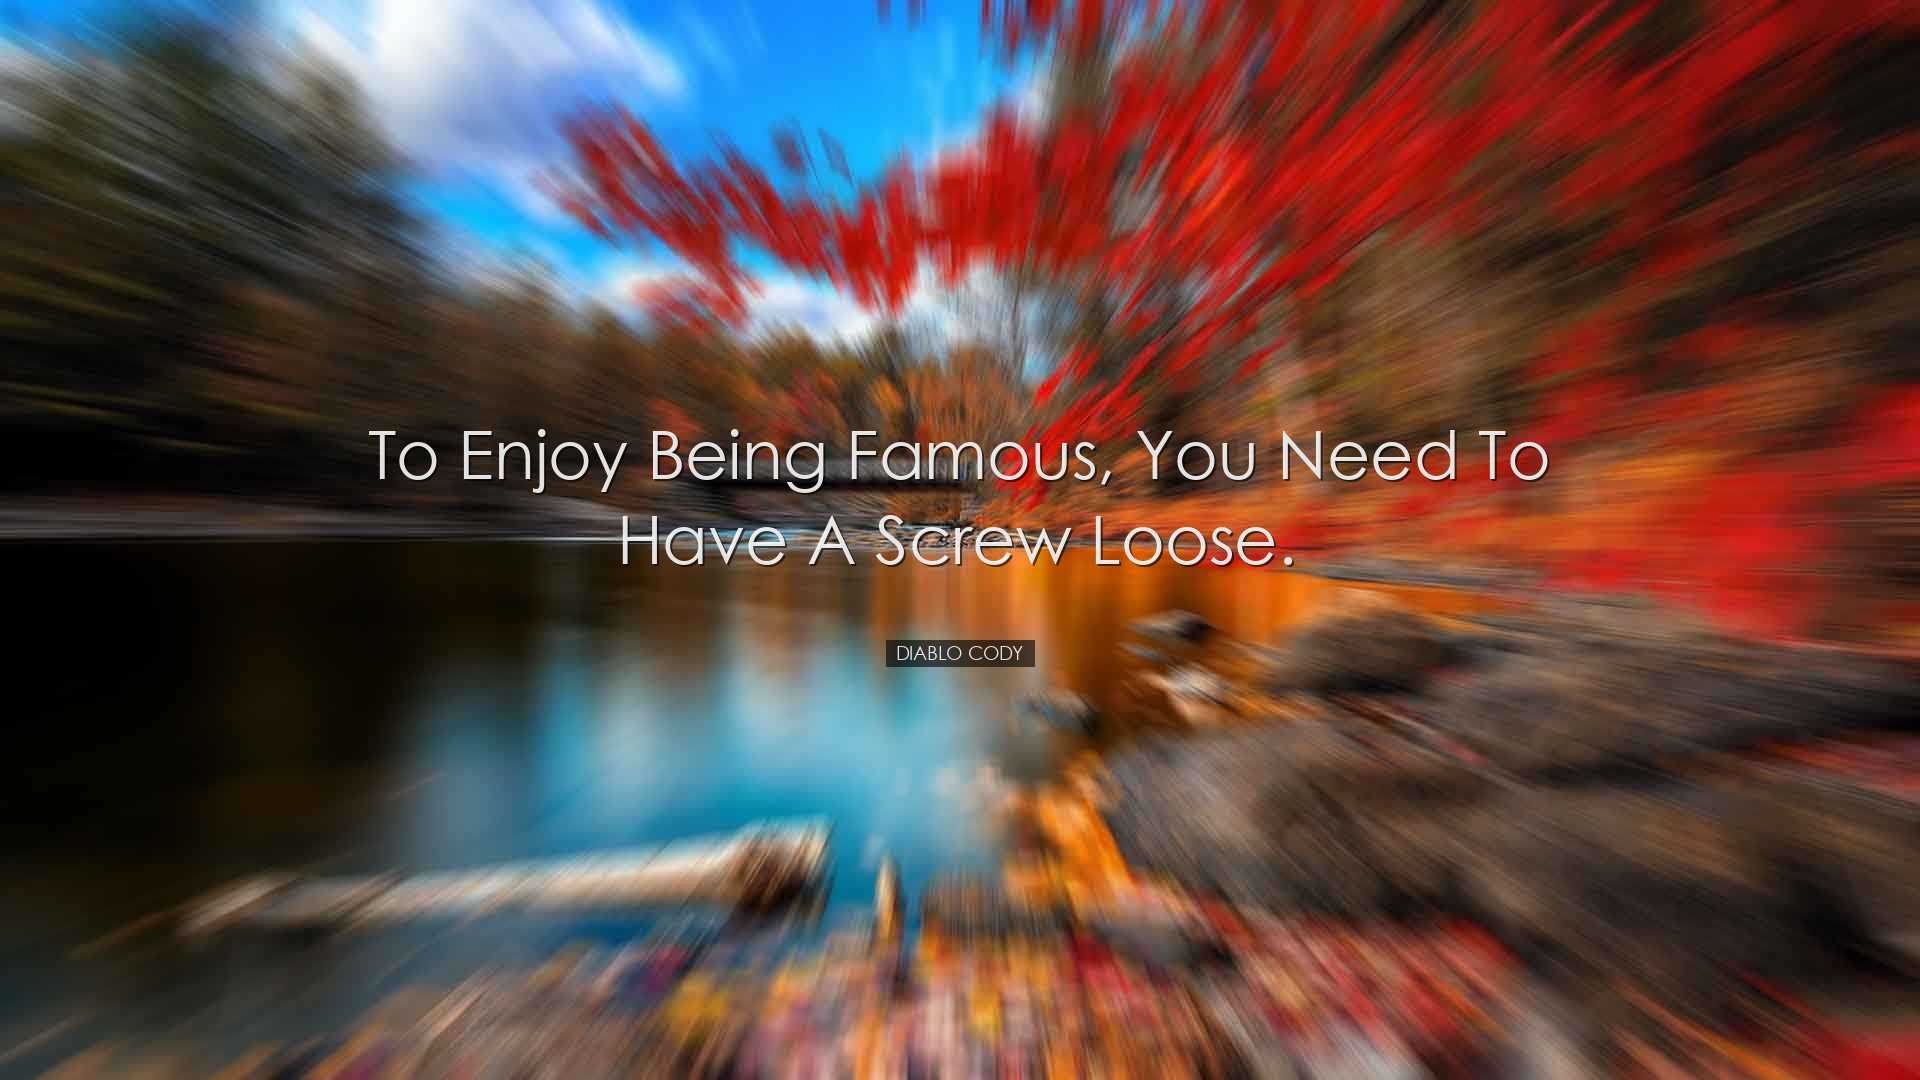 To enjoy being famous, you need to have a screw loose. - Diablo Co